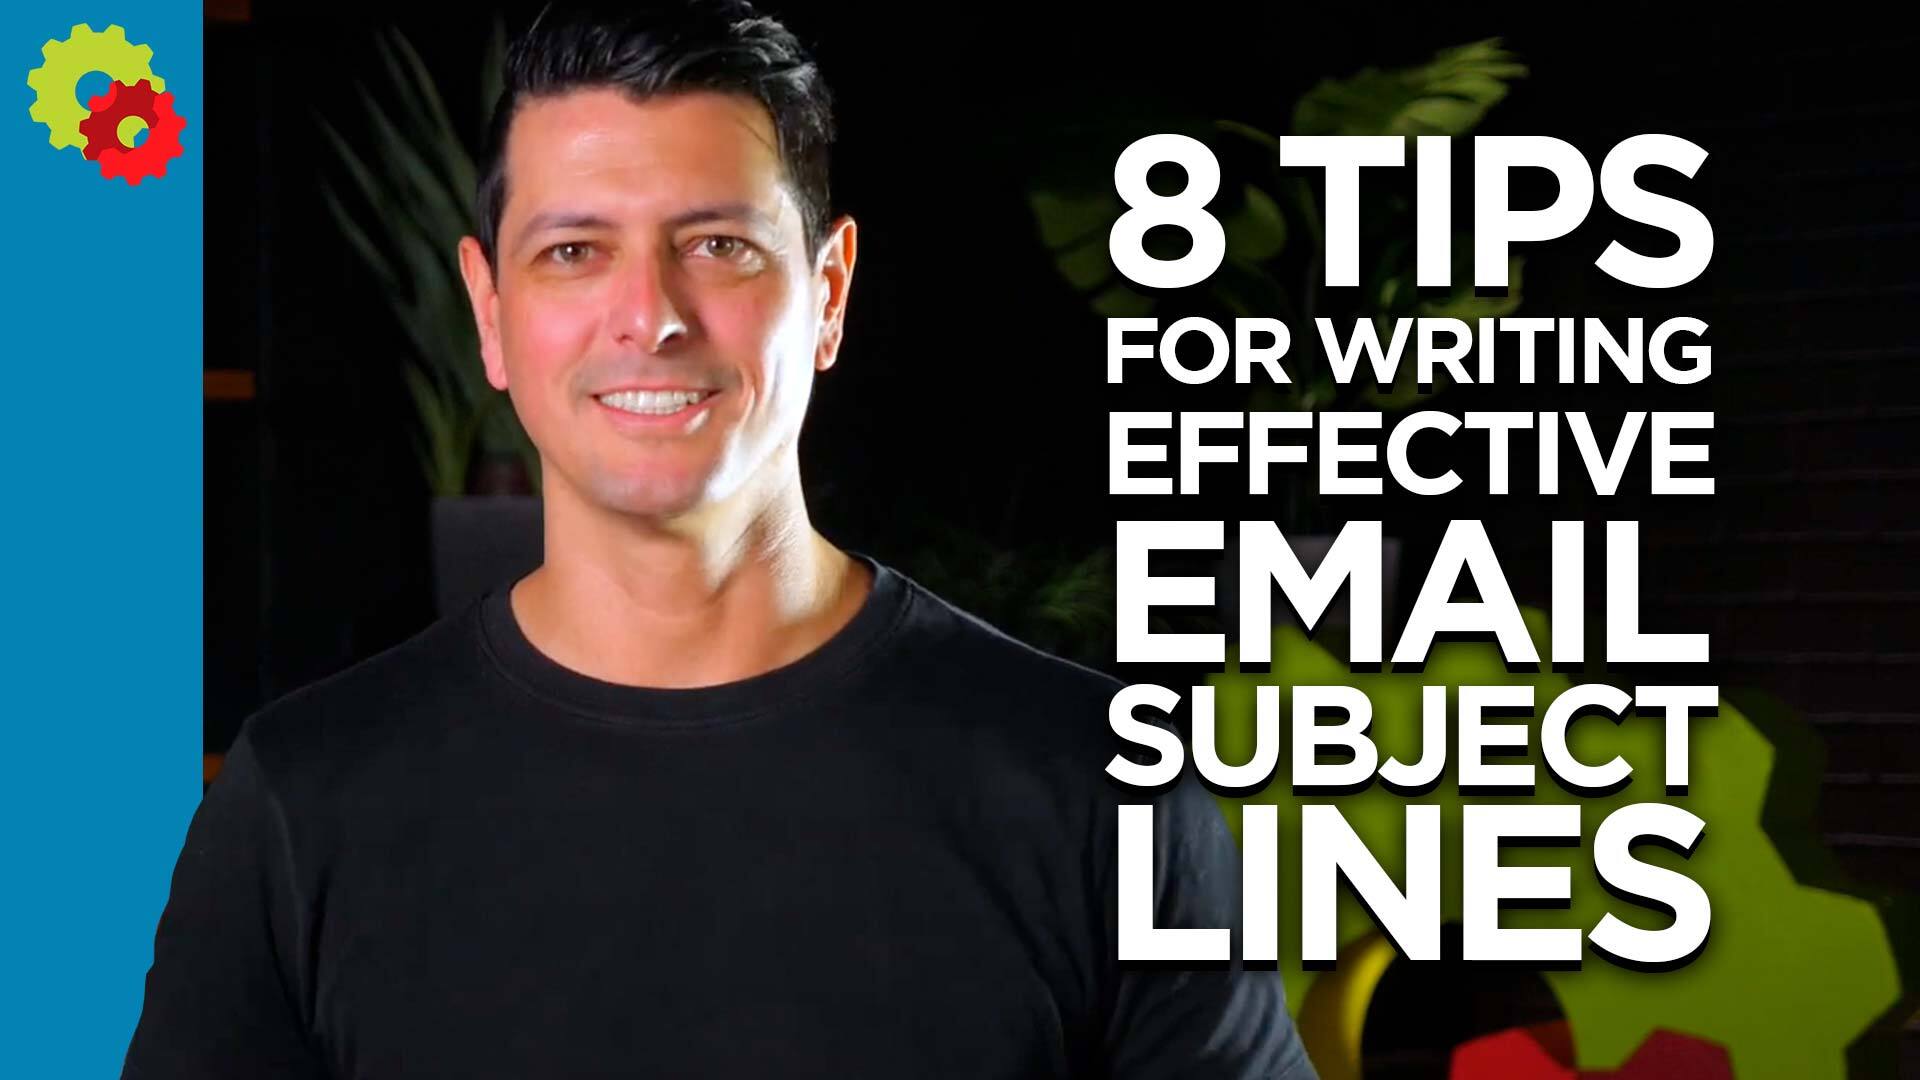 8 Tips For Writing Effective Email Subject Lines [VIDEO]